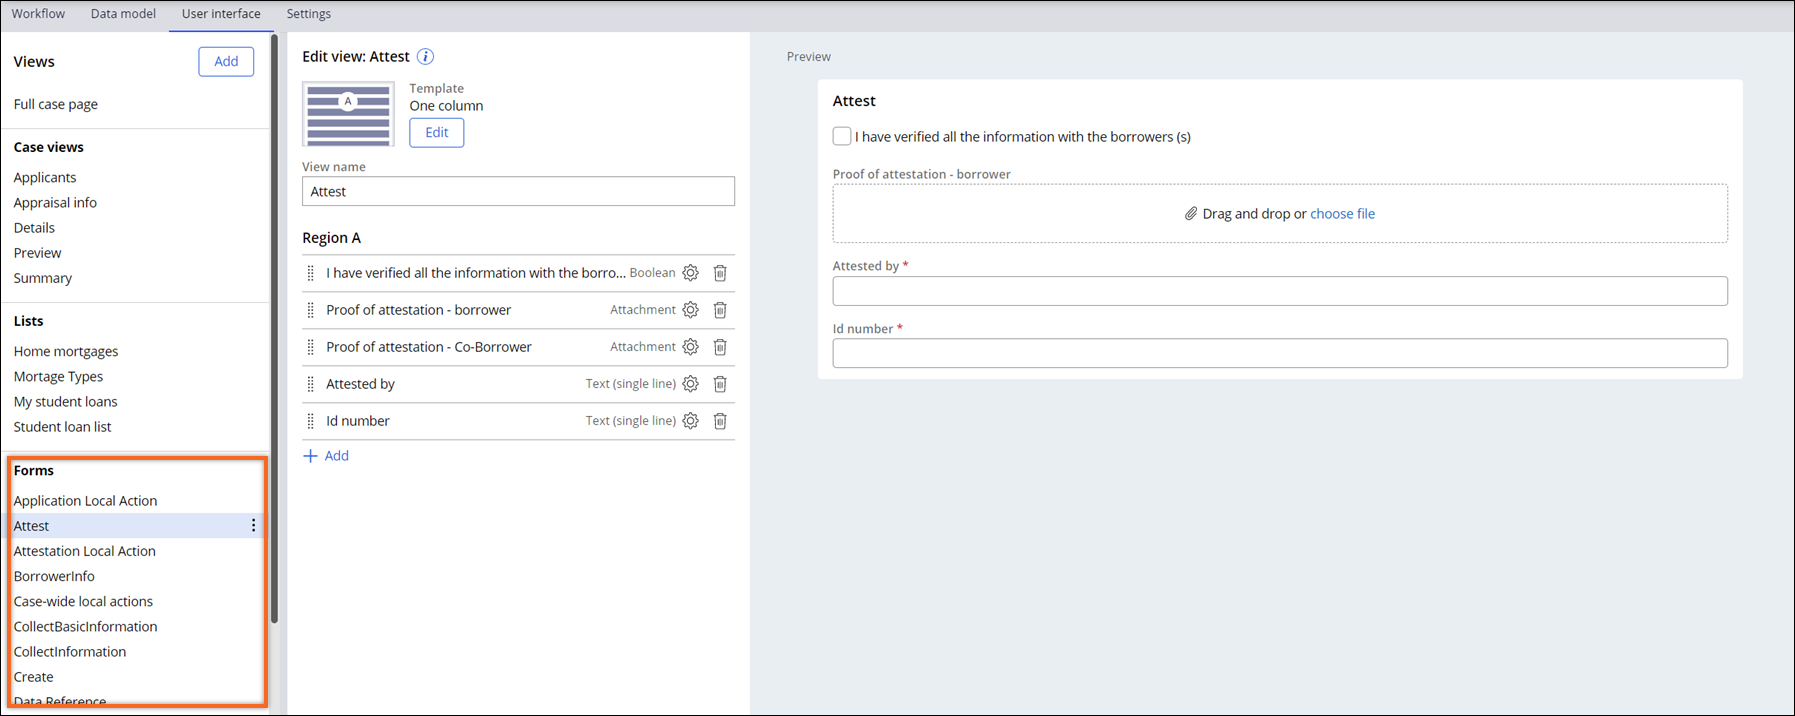 Forms are the final category in the views pane.